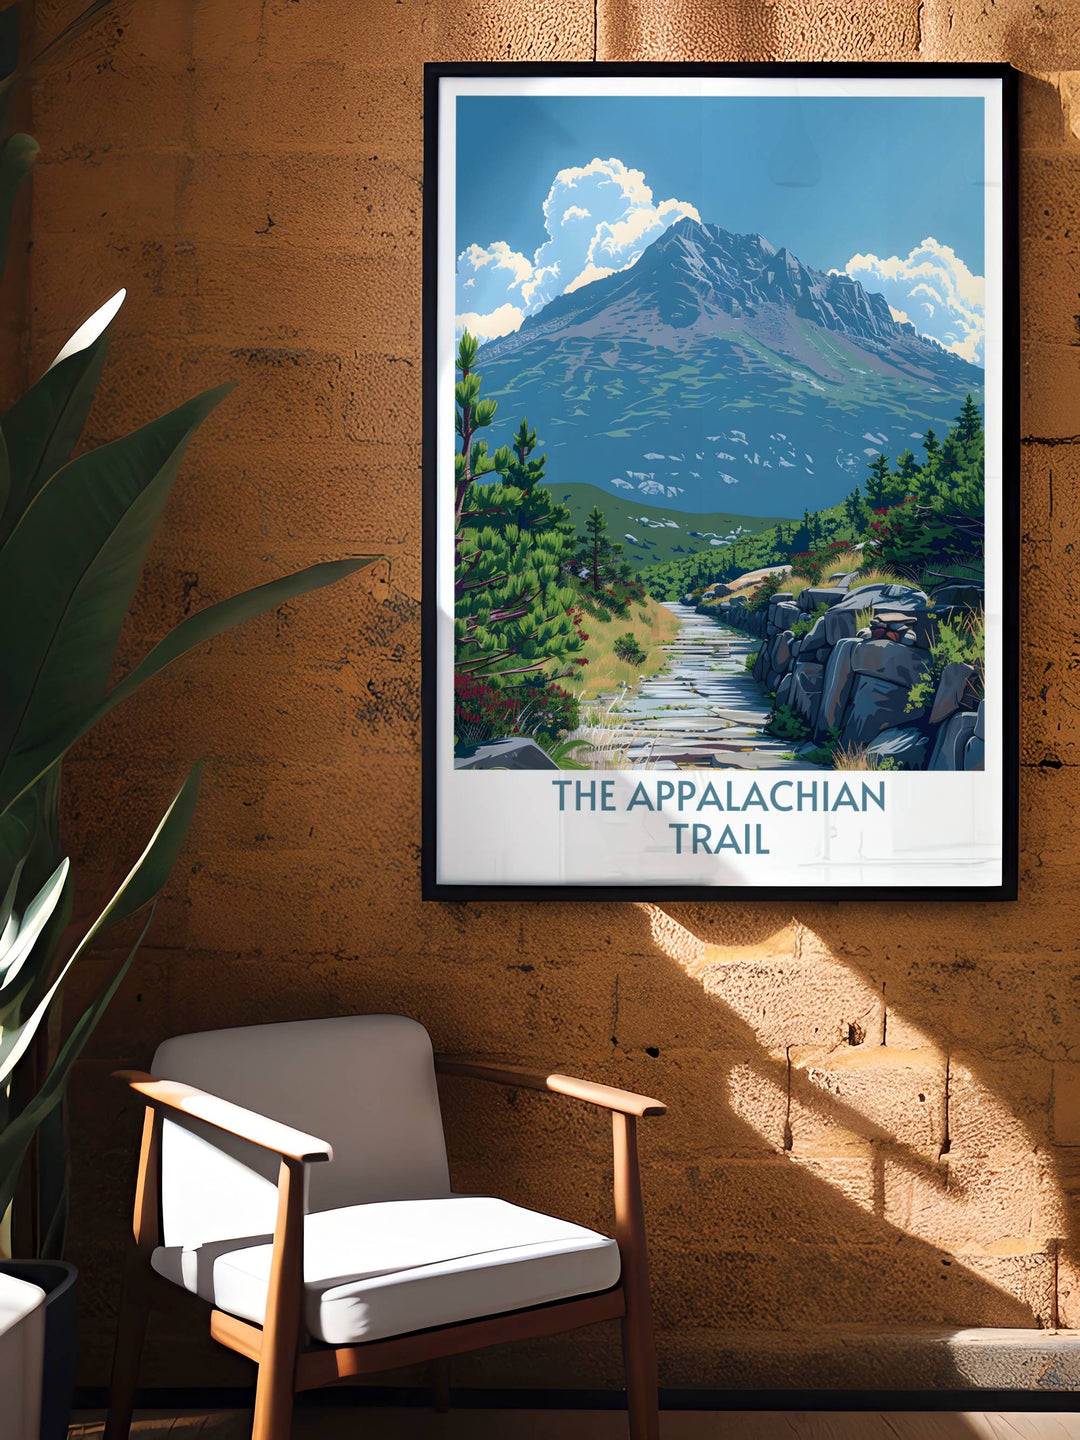 Majestic view of Mount Katahdin captured in a premium framed print, perfect for decorating any nature lover’s space.